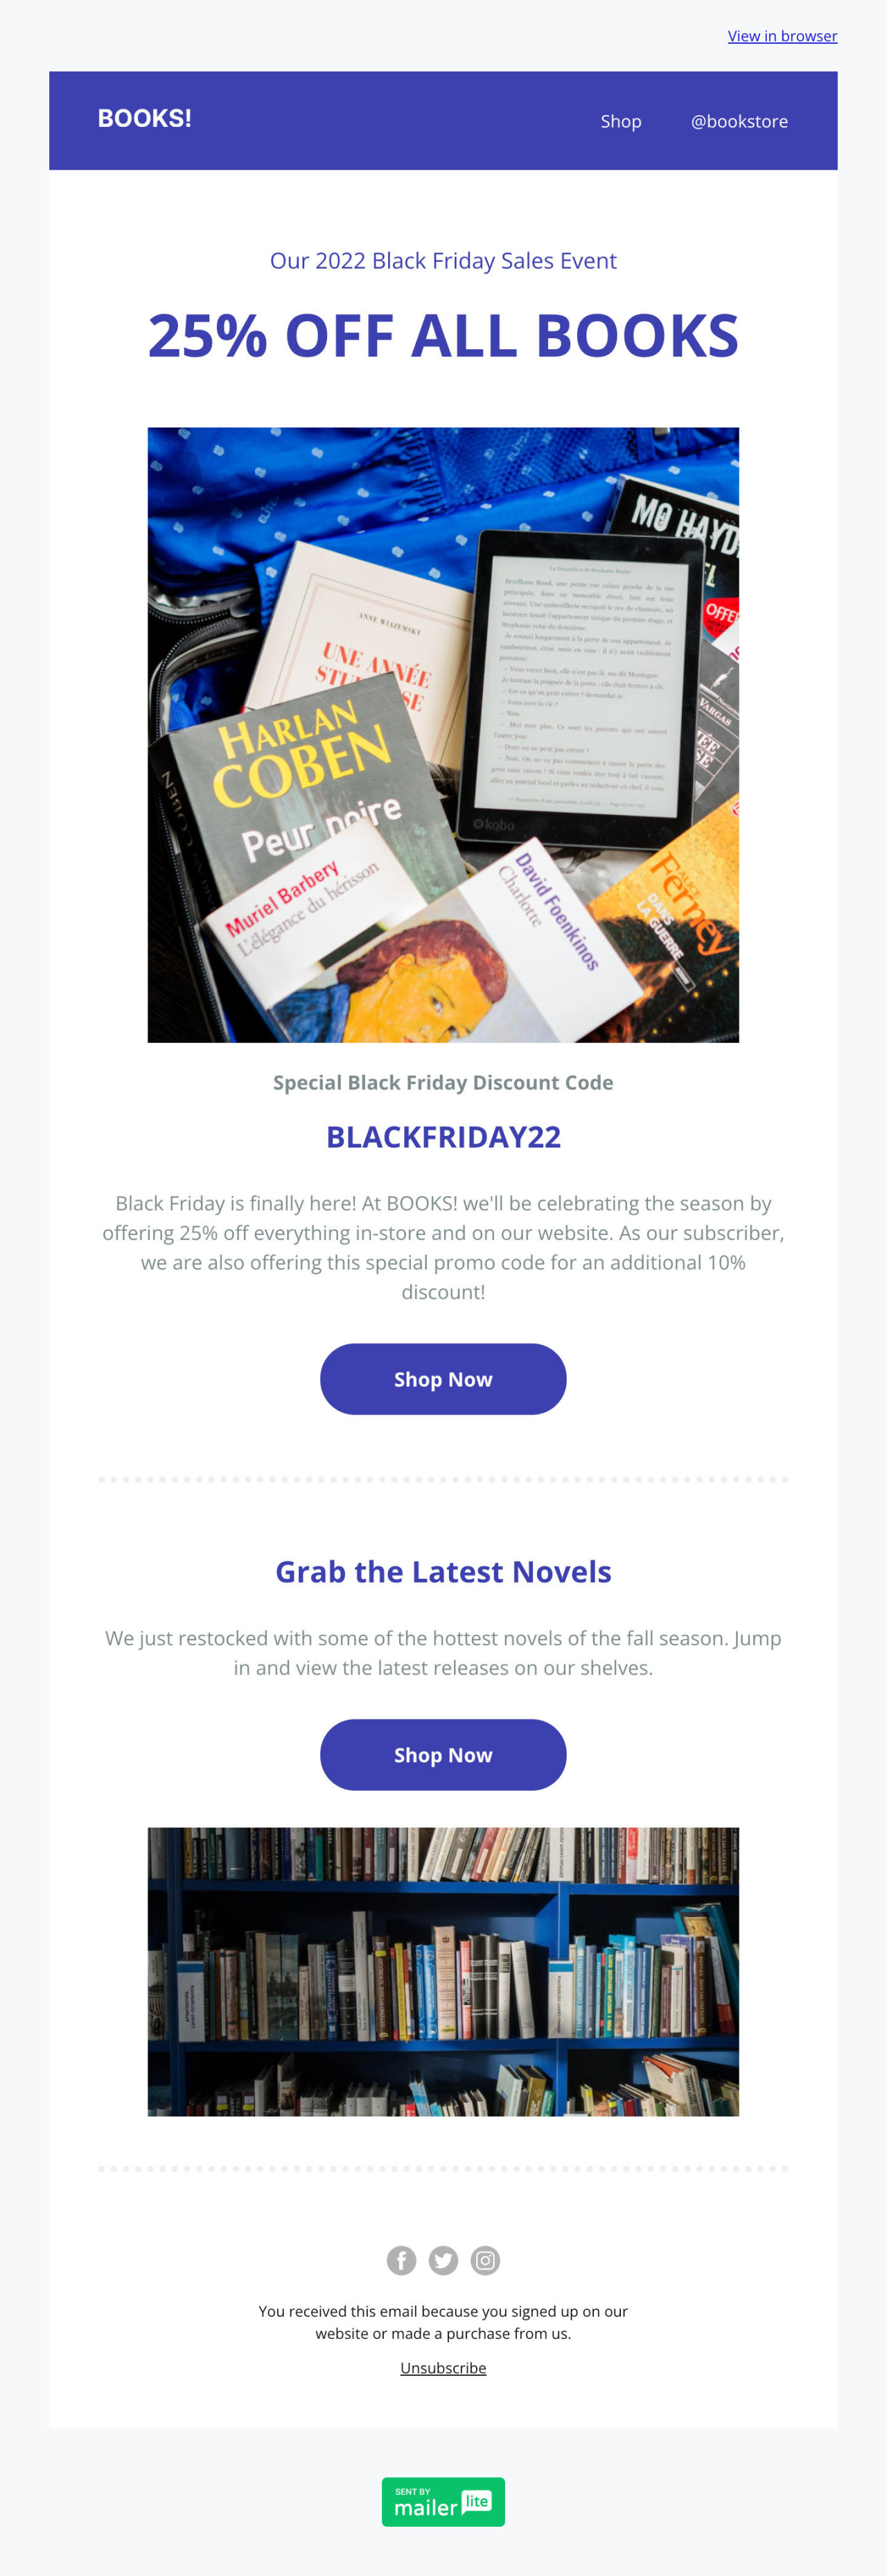 Black Friday book sale template - Made by MailerLite